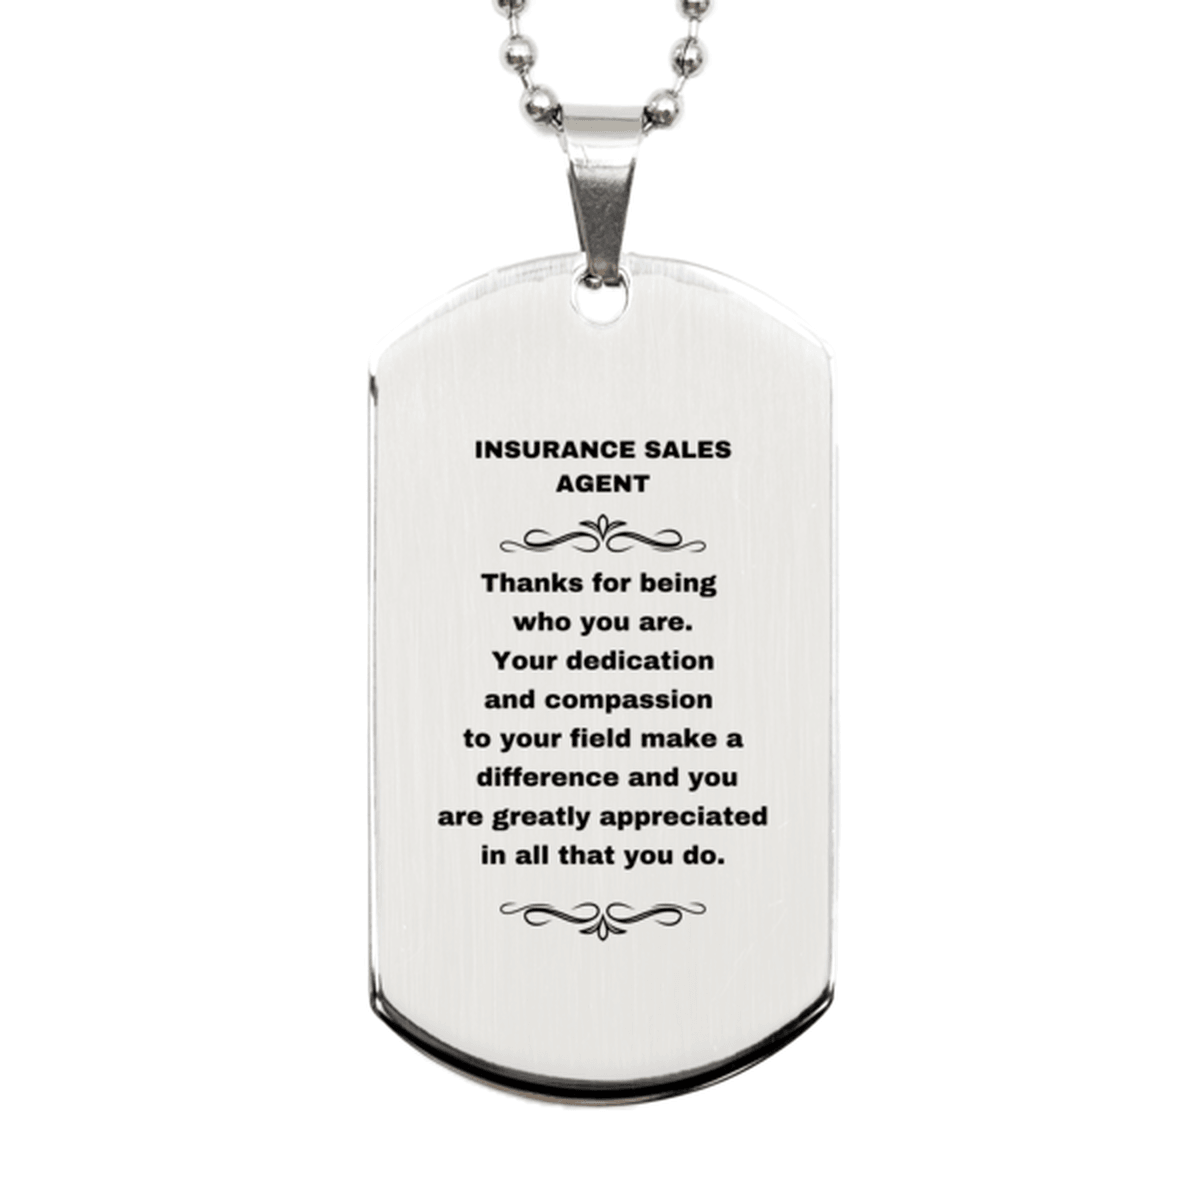 Insurance Sales Agent Silver Dog Tag Necklace - Thanks for being who you are - Birthday Christmas Jewelry Gifts Coworkers Colleague Boss - Mallard Moon Gift Shop